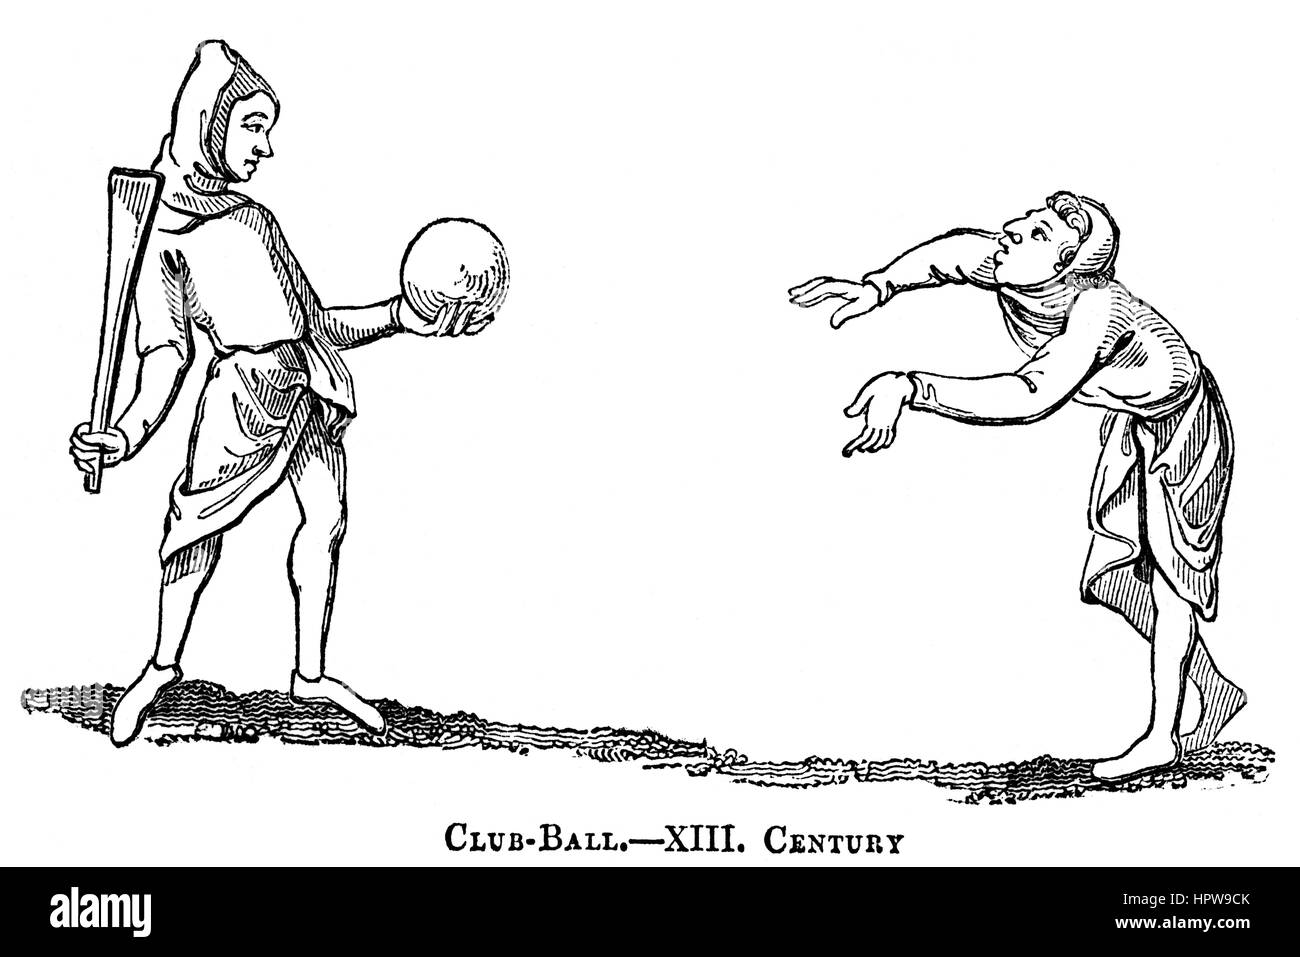 An illustration of Club Ball in the 13th Century scanned at high resolution from a book printed in 1831.  Believed copyright free. Stock Photo